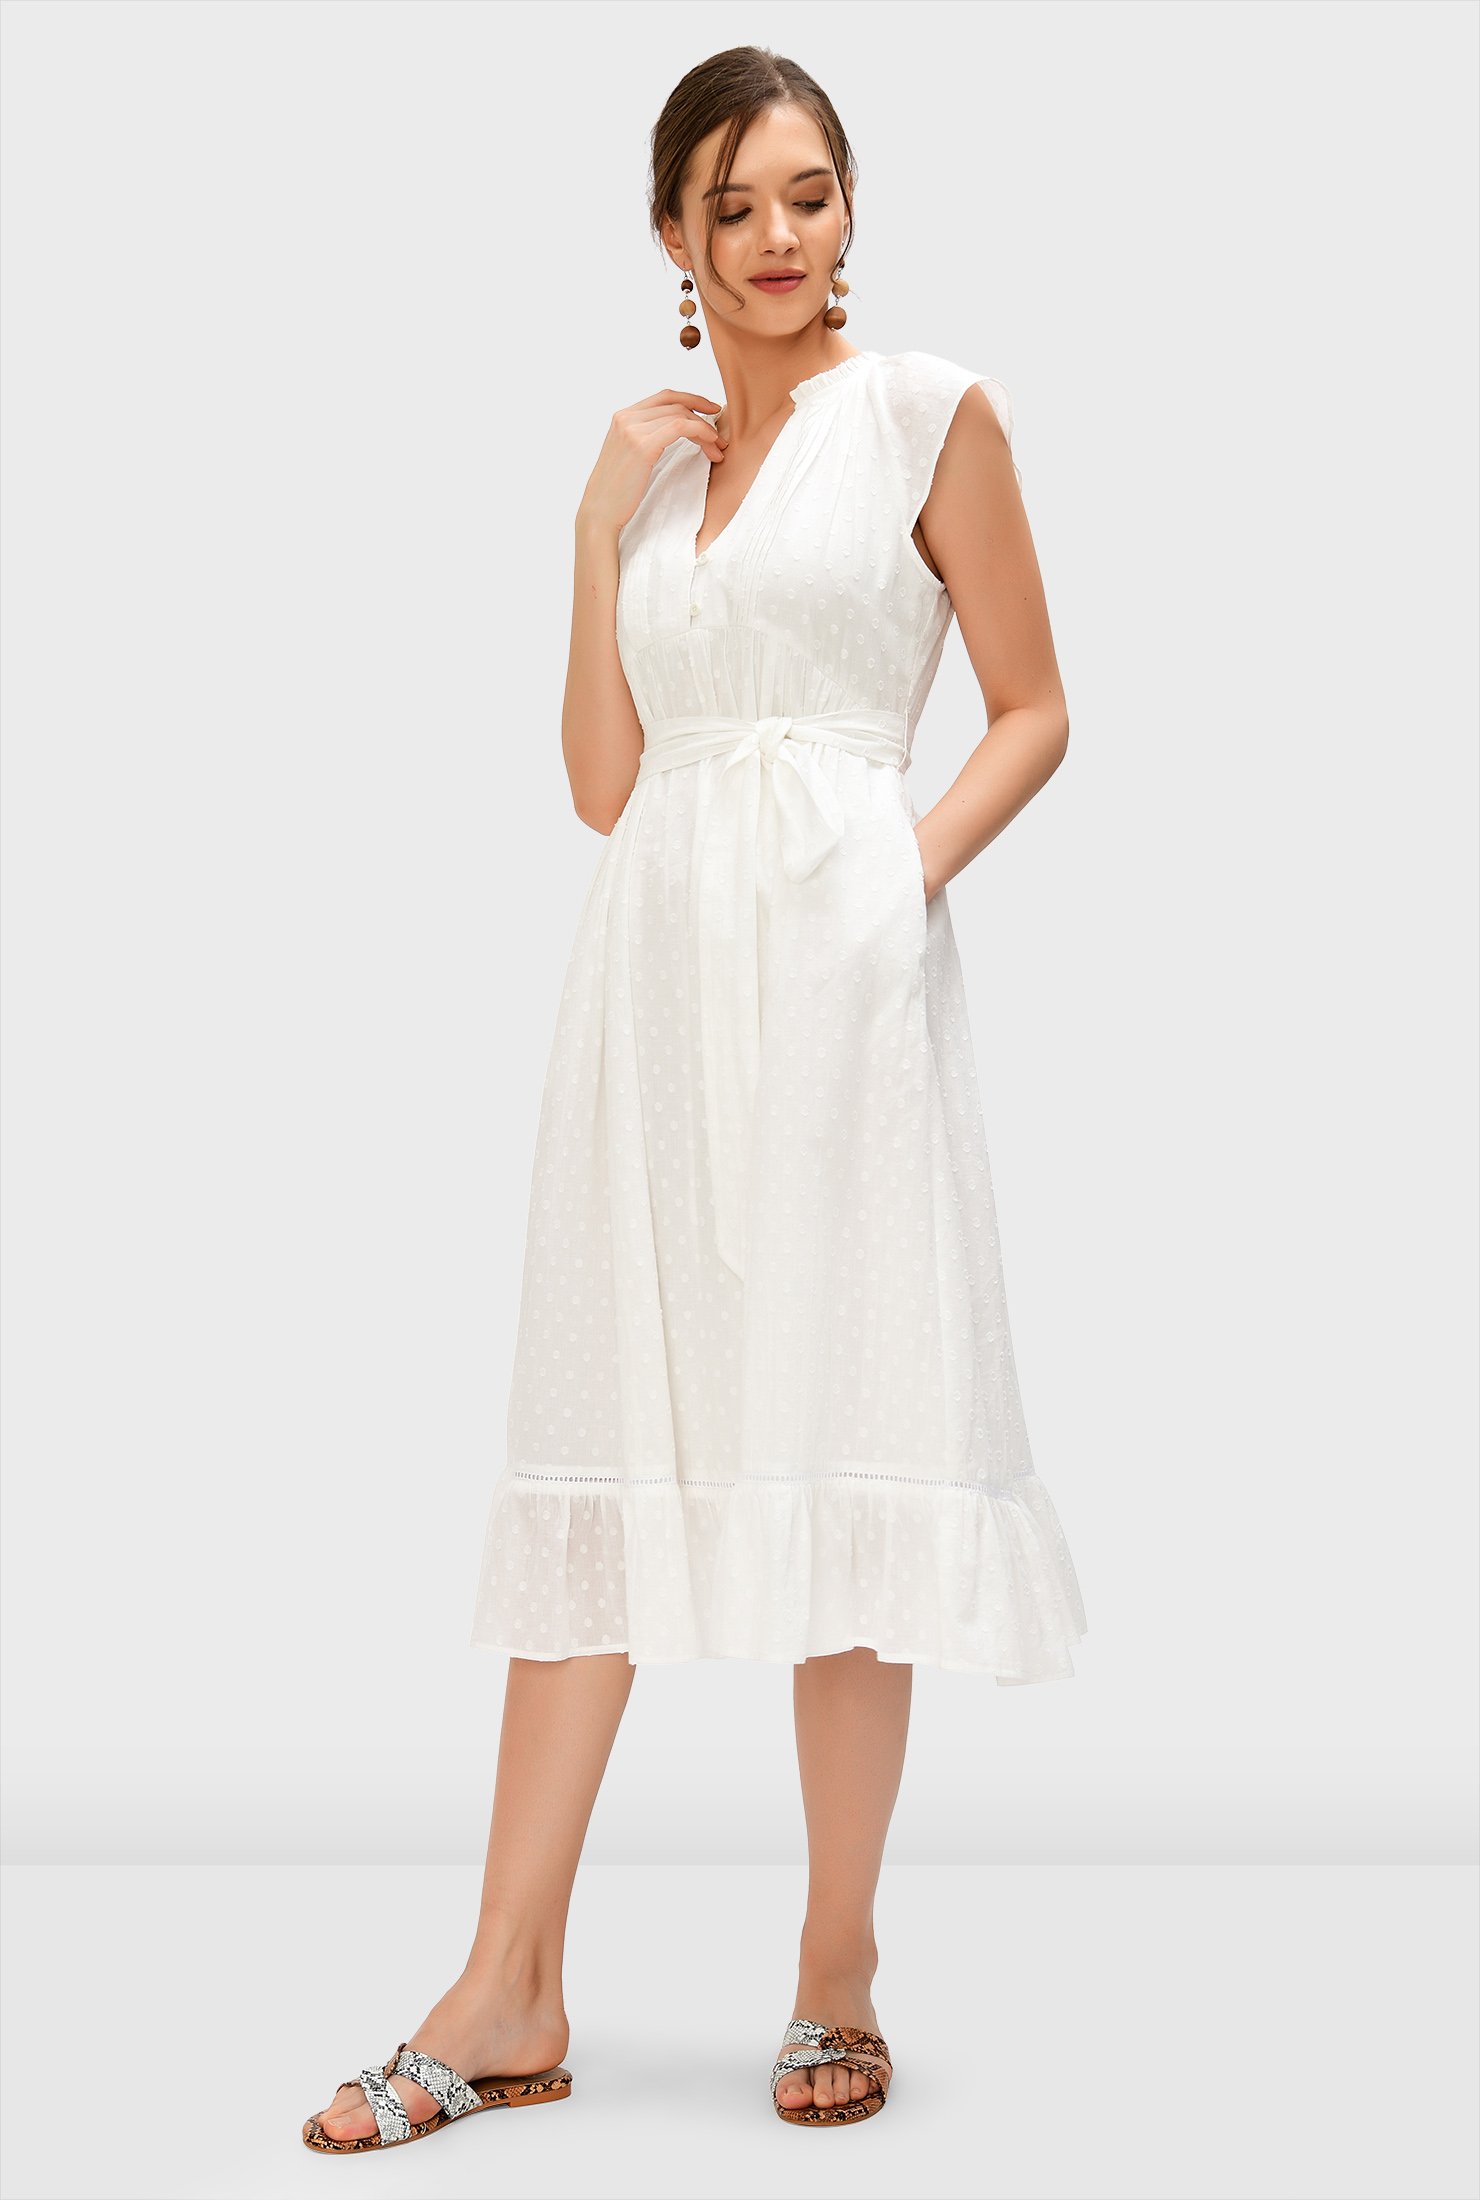 The perfect summer dress, our weightless white crafted from swiss dot cotton voile with a short rouleau-button front and relaxed empire waist floats down to a ruffle flounce hem.